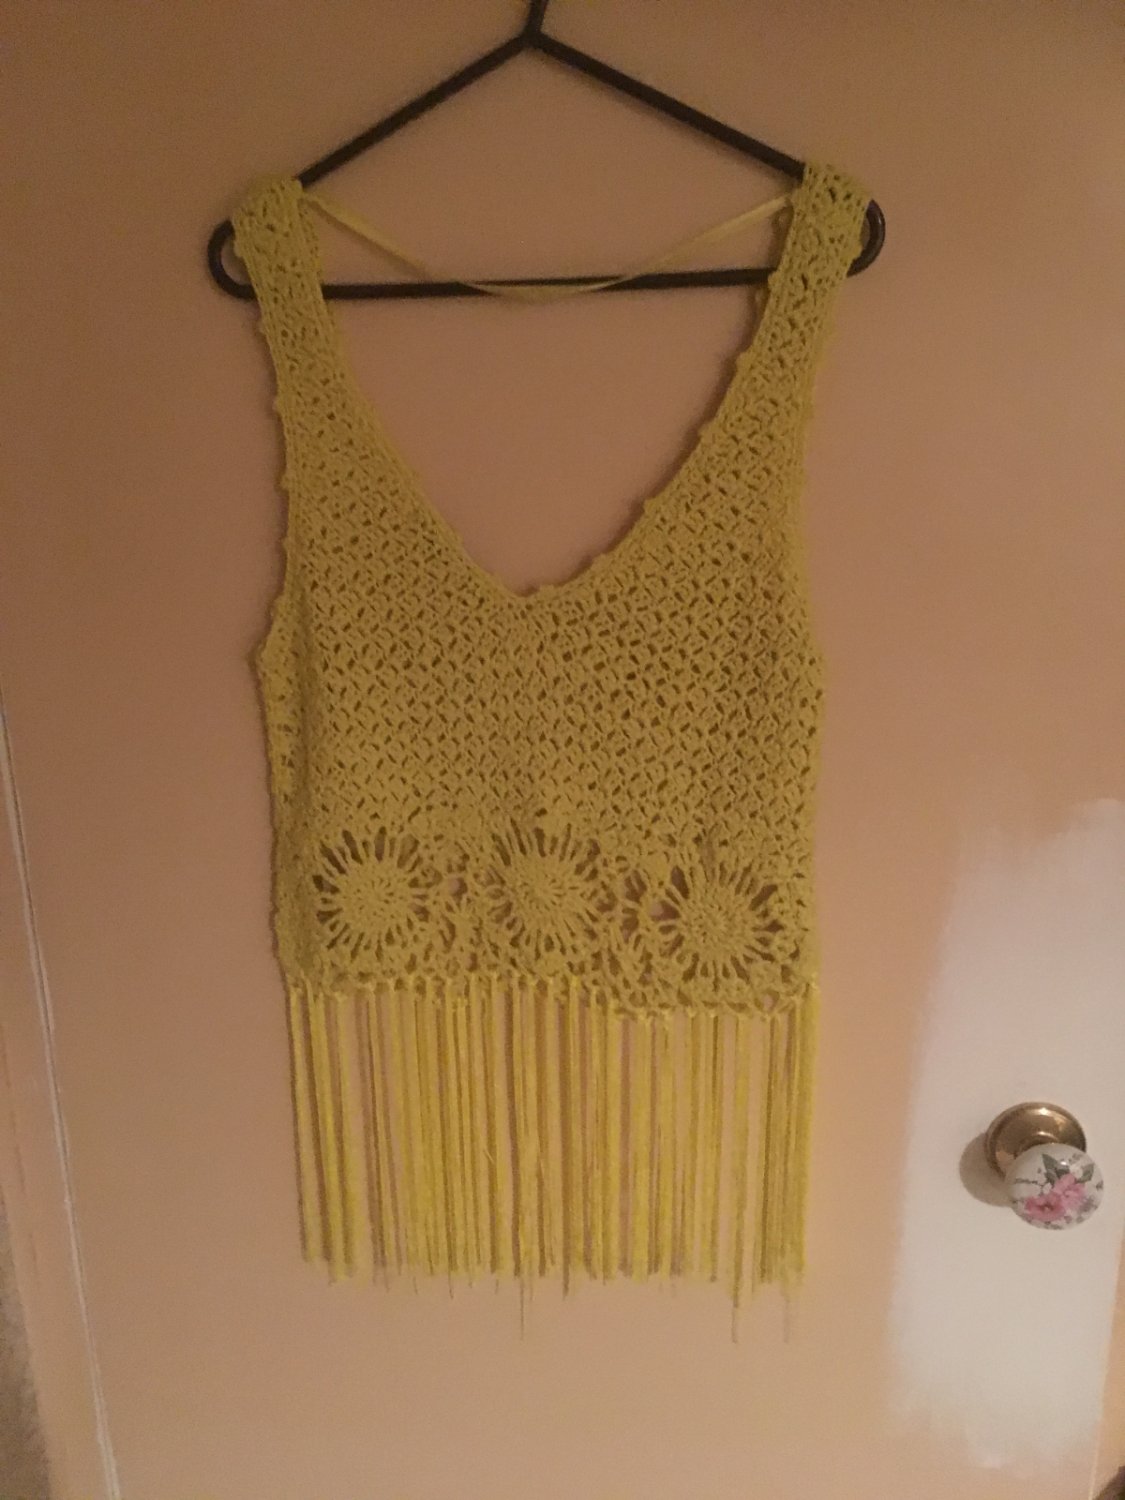 YELLOW COTTON CROCHET LOW V FRONT BACK CROP FRINGE TOP SIZE SMALL ATMOSPHERE